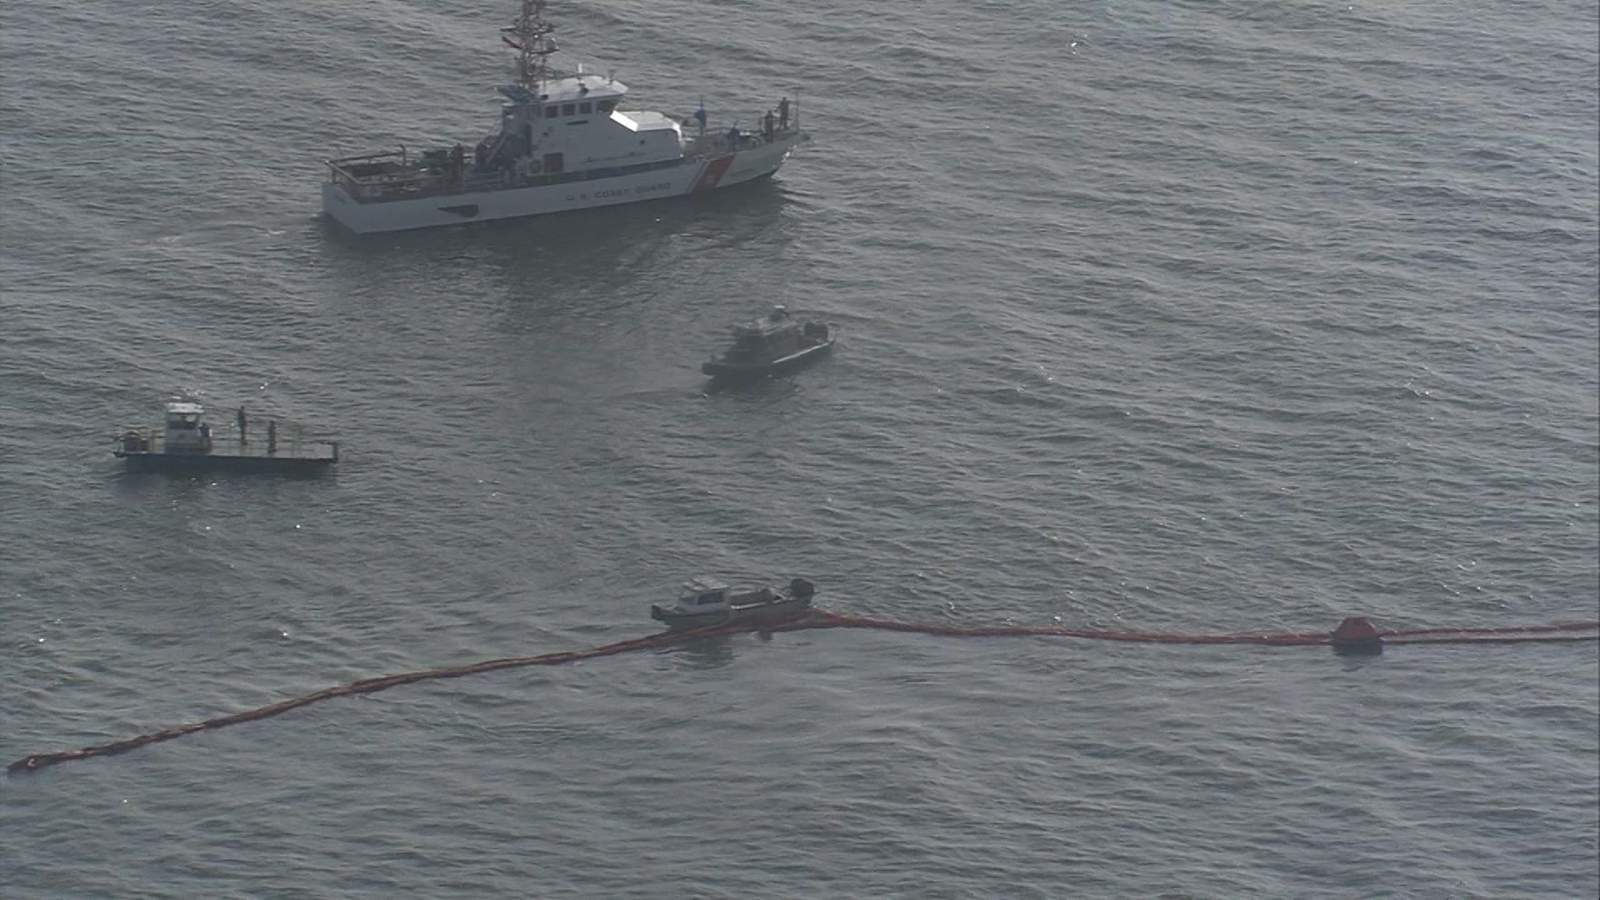 2 missing, 1 dead after fishing boat collides with 600-foot chemical tanker in Galveston